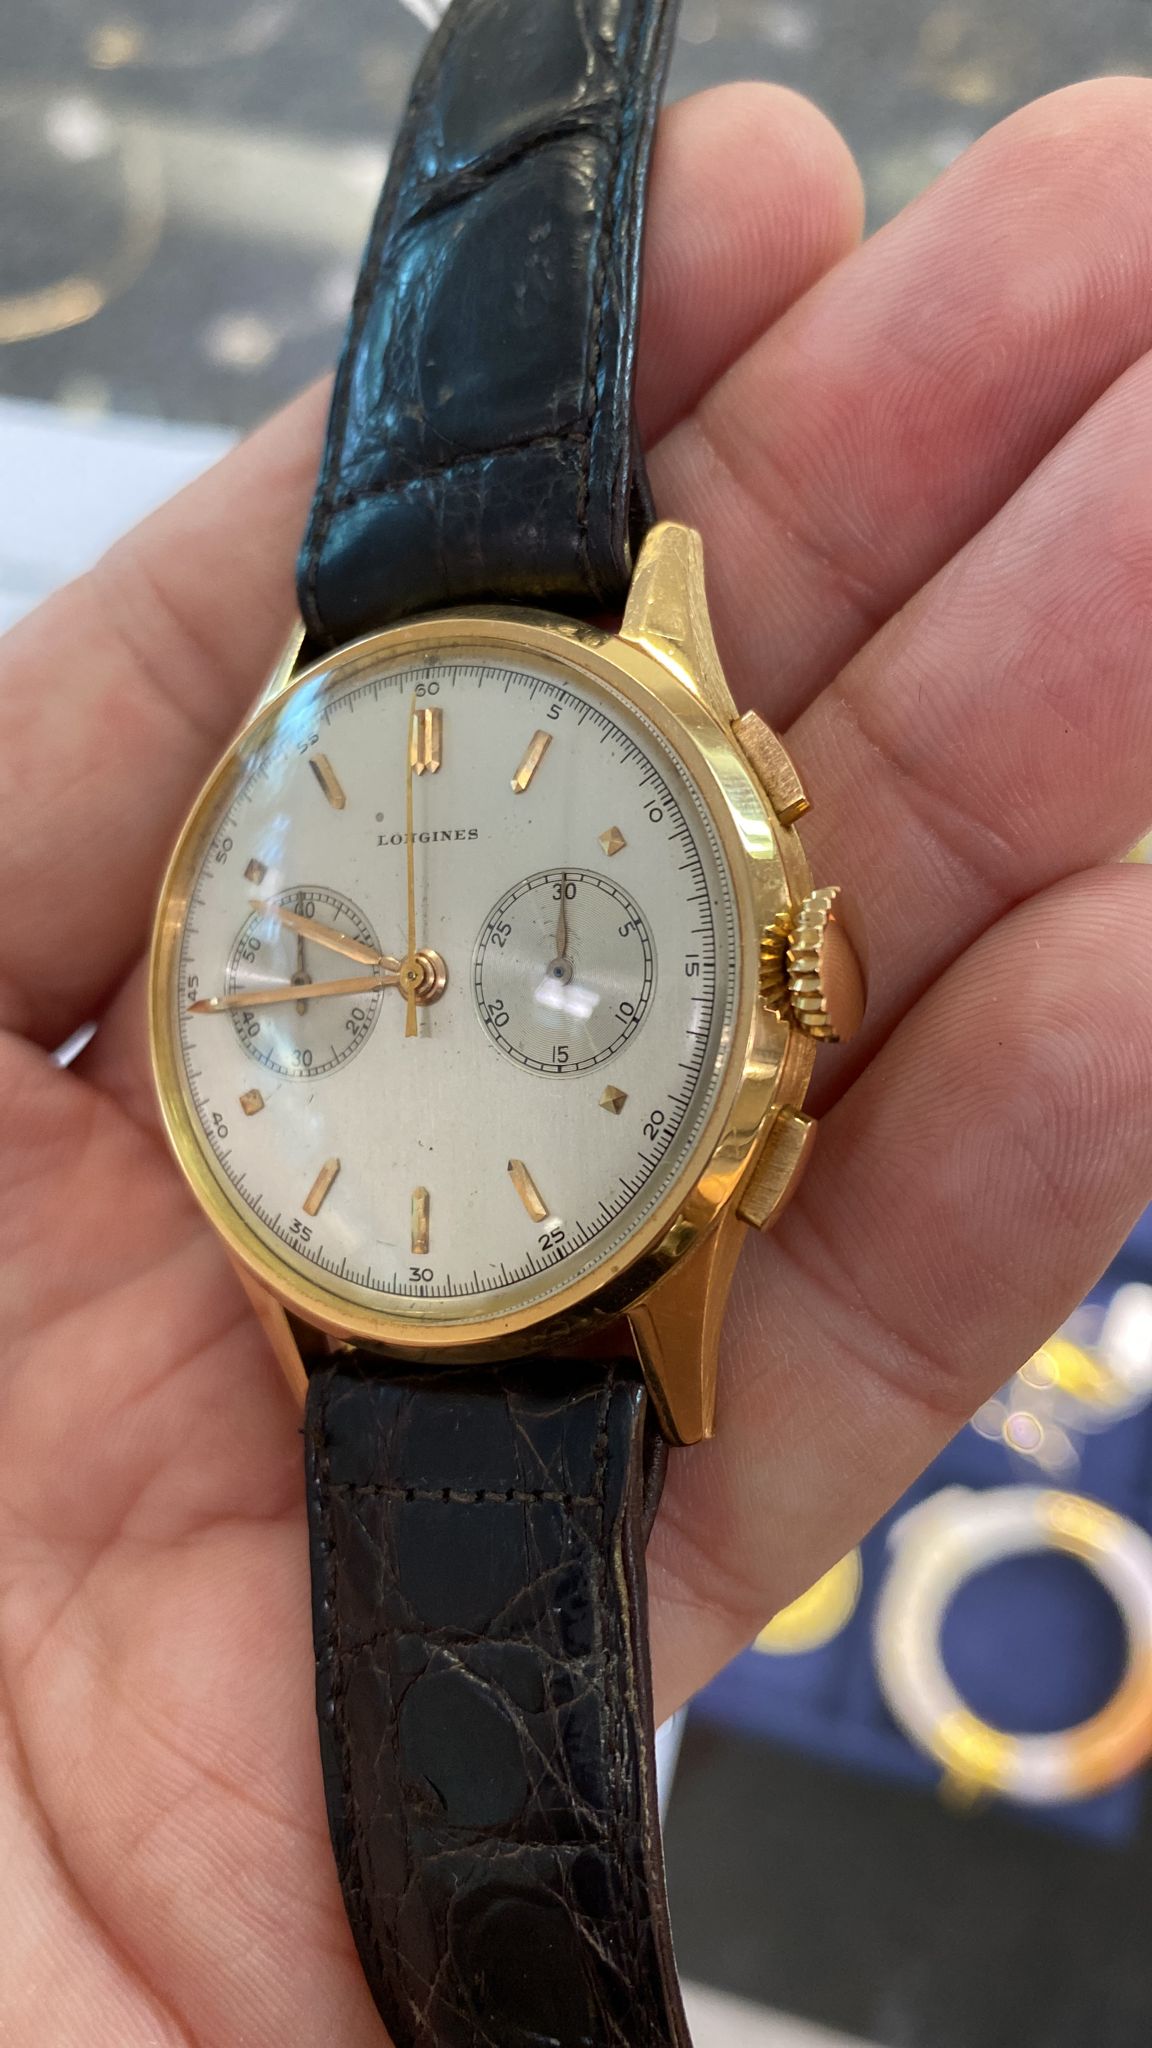 A LONGINES GOLD 13ZN FLYBACK CHRONOGRAPH WATCH - Image 9 of 10